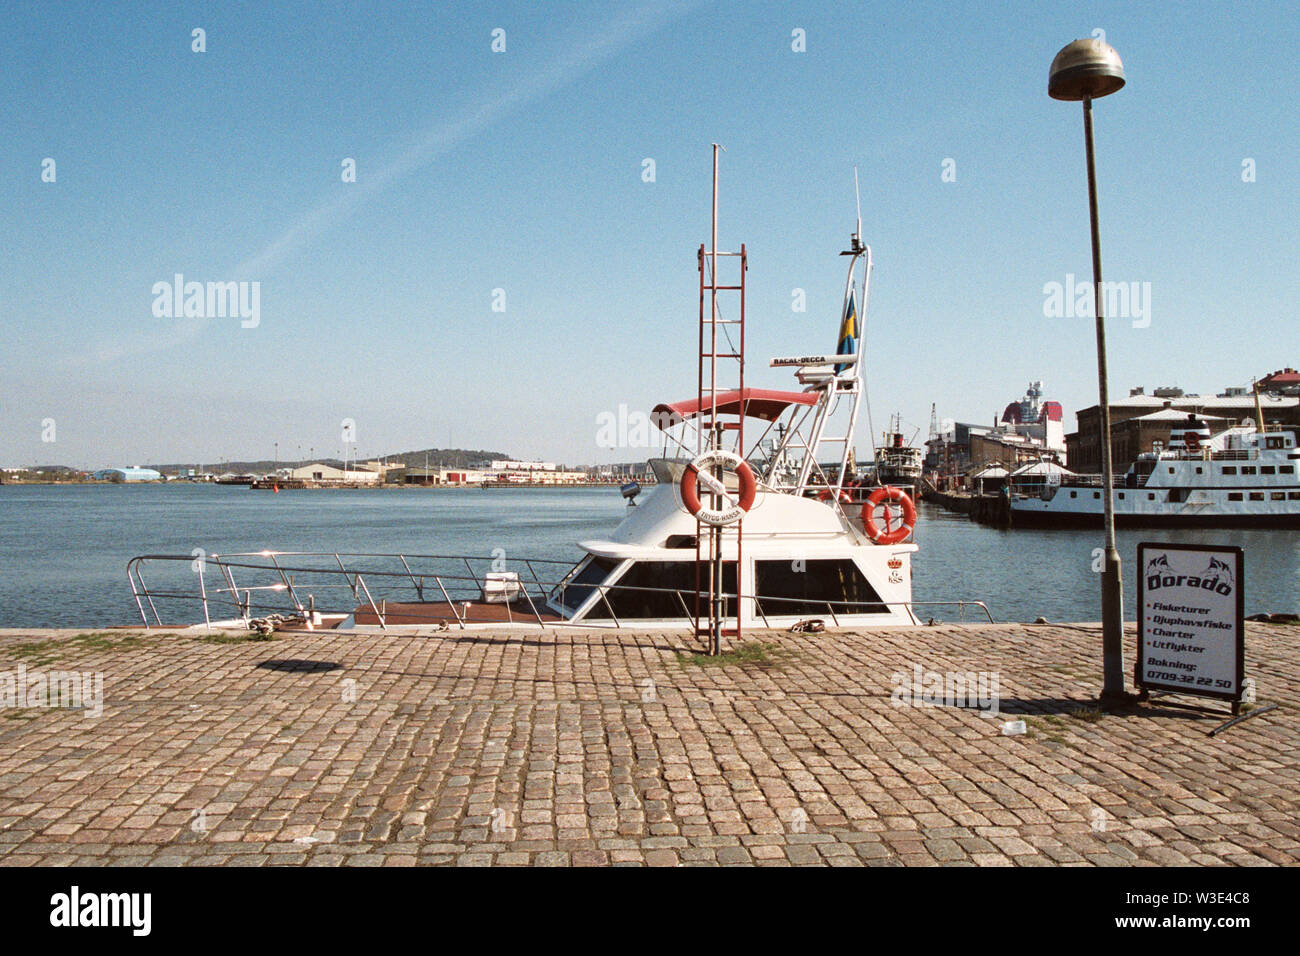 Gothenburg Harbor Sweden the busiest shipping port in the Nordic countries. Stock Photo